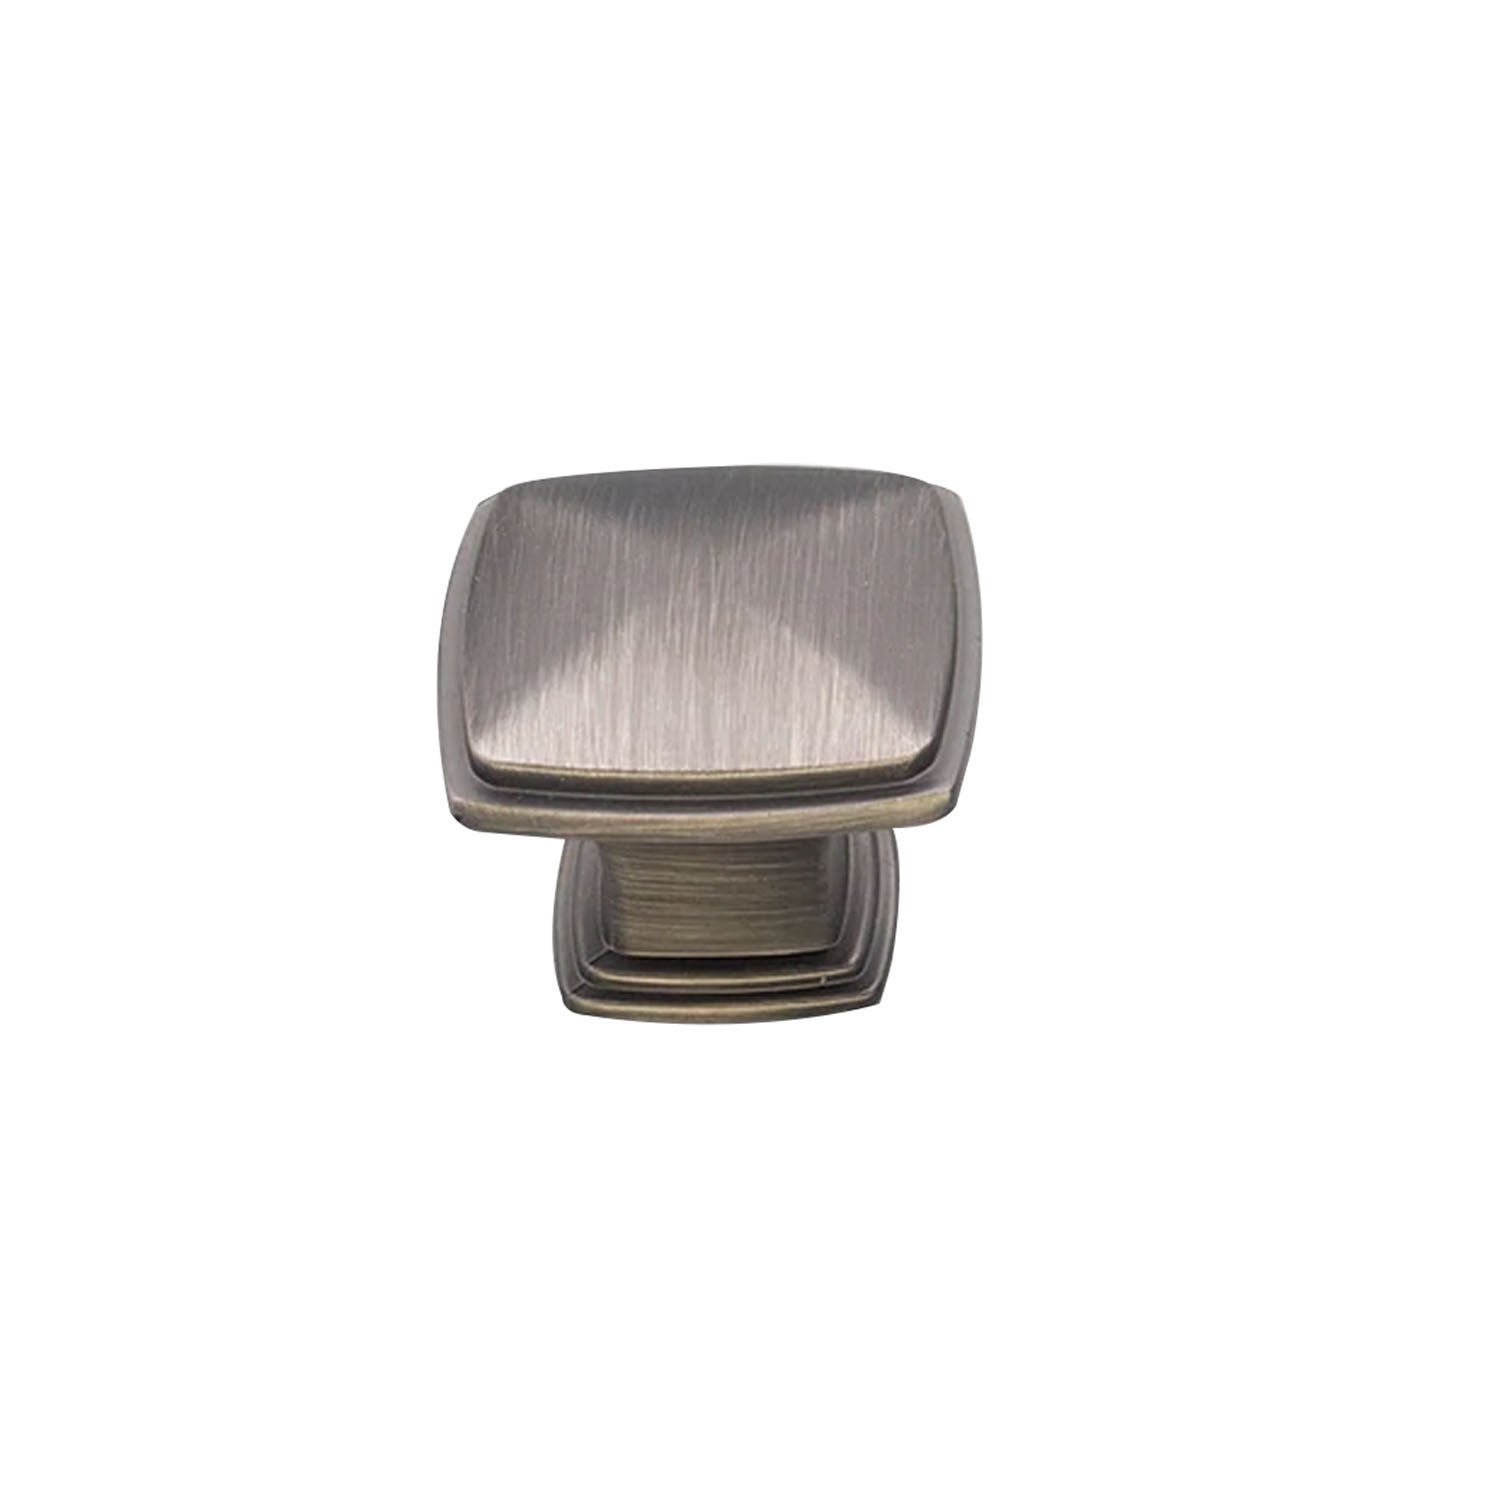 Kethy HT574 Darwen Hampton Cabinet Knob 31mm - Available In Various Finishes